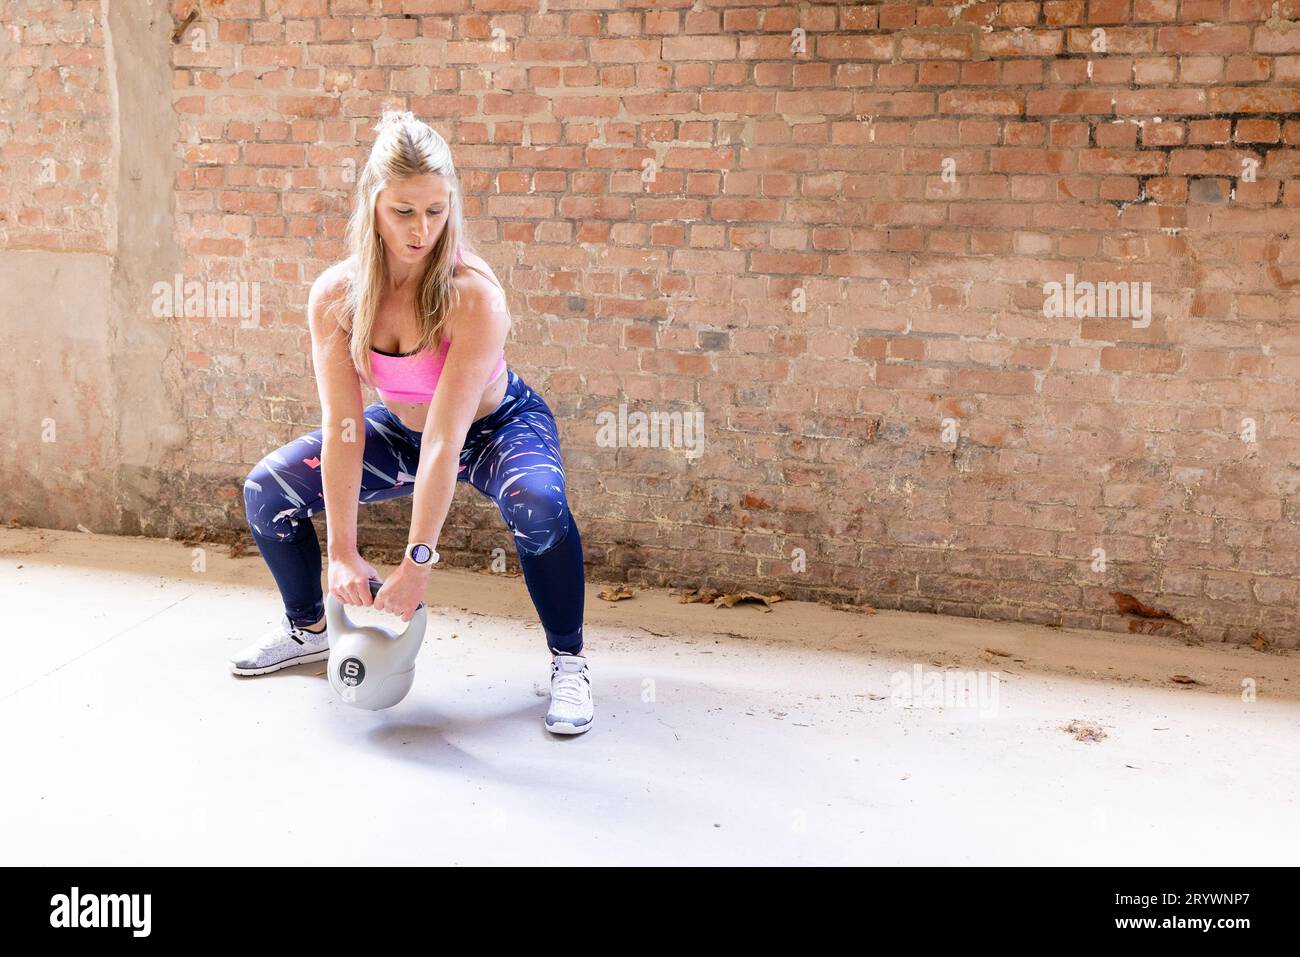 Young Attractive Blonde Woman Lifting Heavy Kettlebell in Industrial Fitness Setting Stock Photo